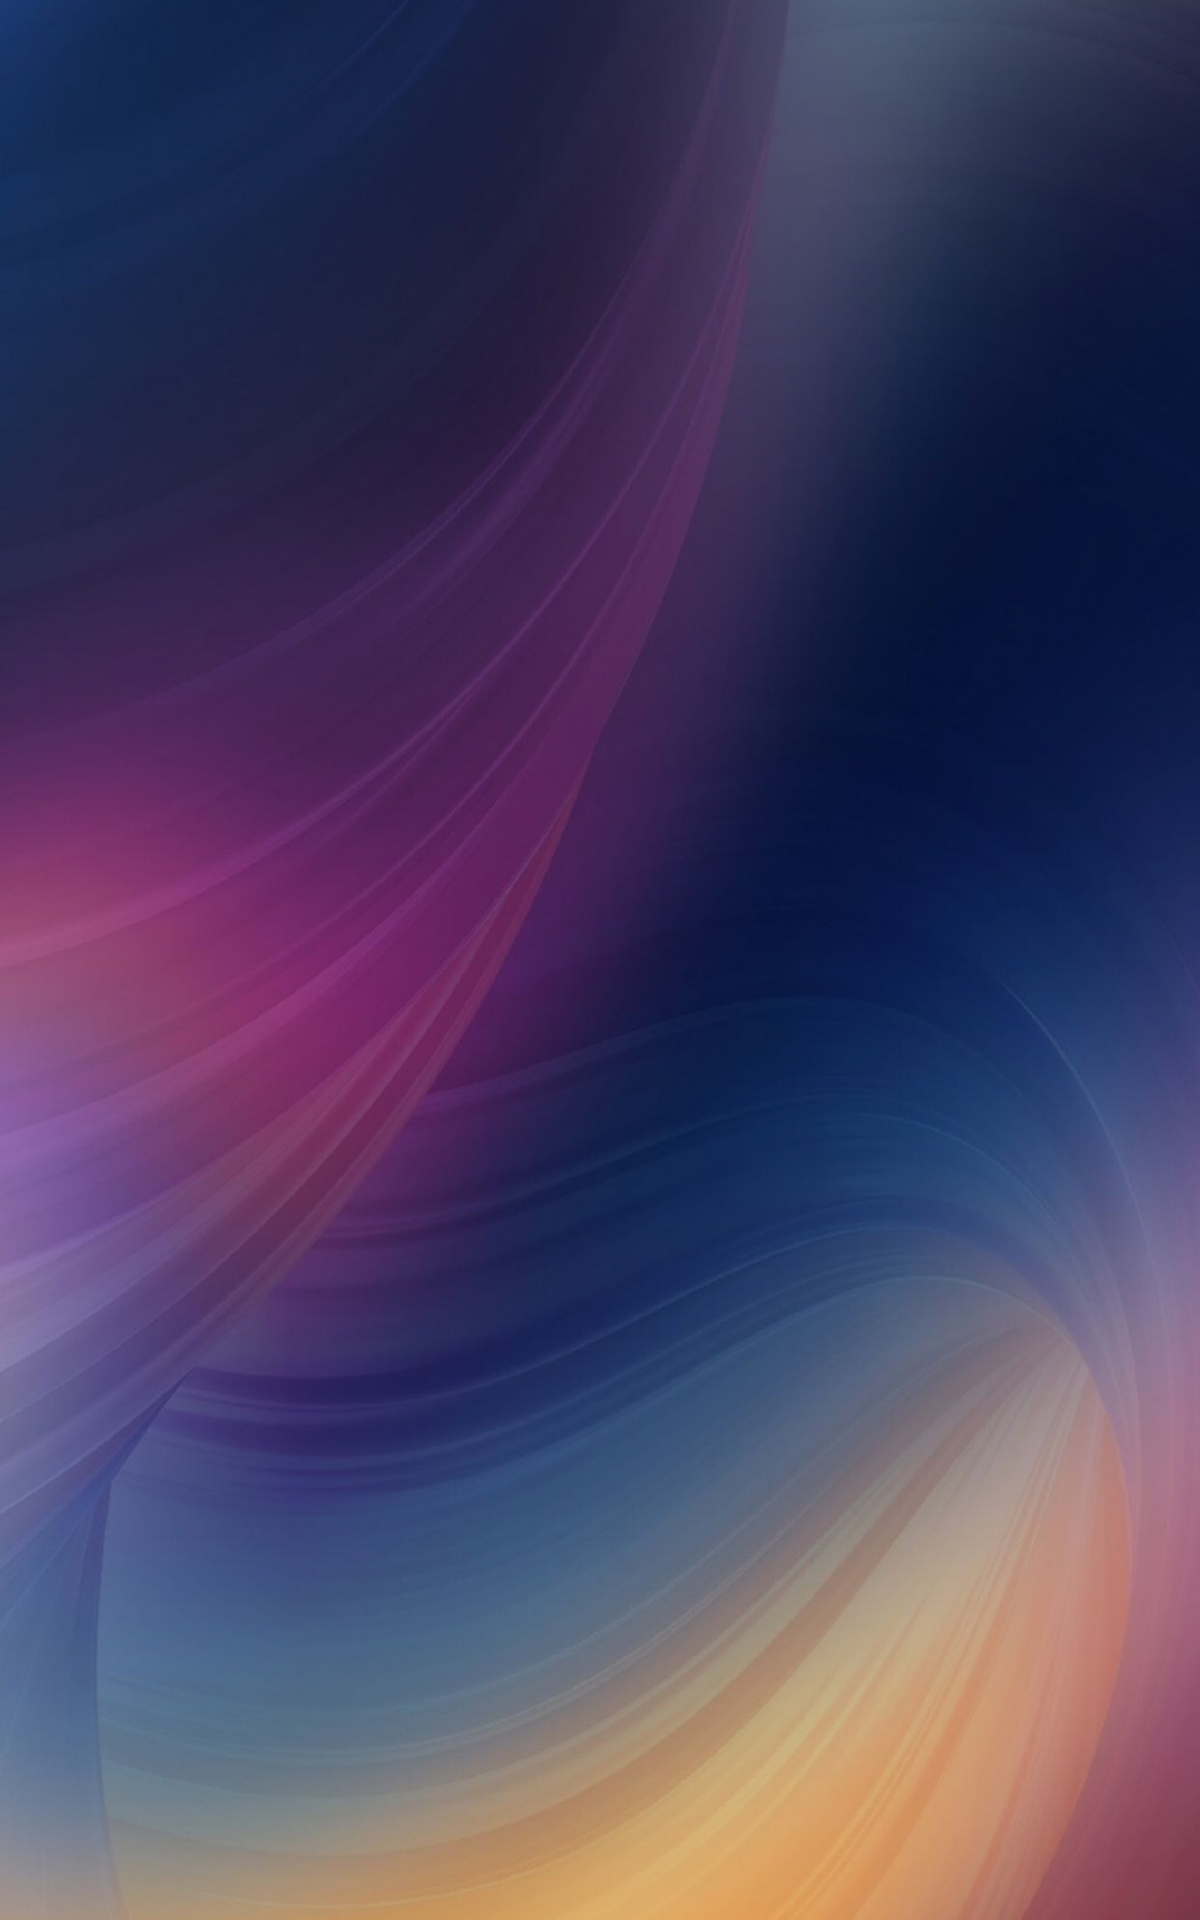 Free download iOS 11 iPhone X purple blue clean simple abstract apple [1242x2808] for your Desktop, Mobile & Tablet. Explore Ios 8 HD Wallpaper Purple. Ios 8 HD Wallpaper